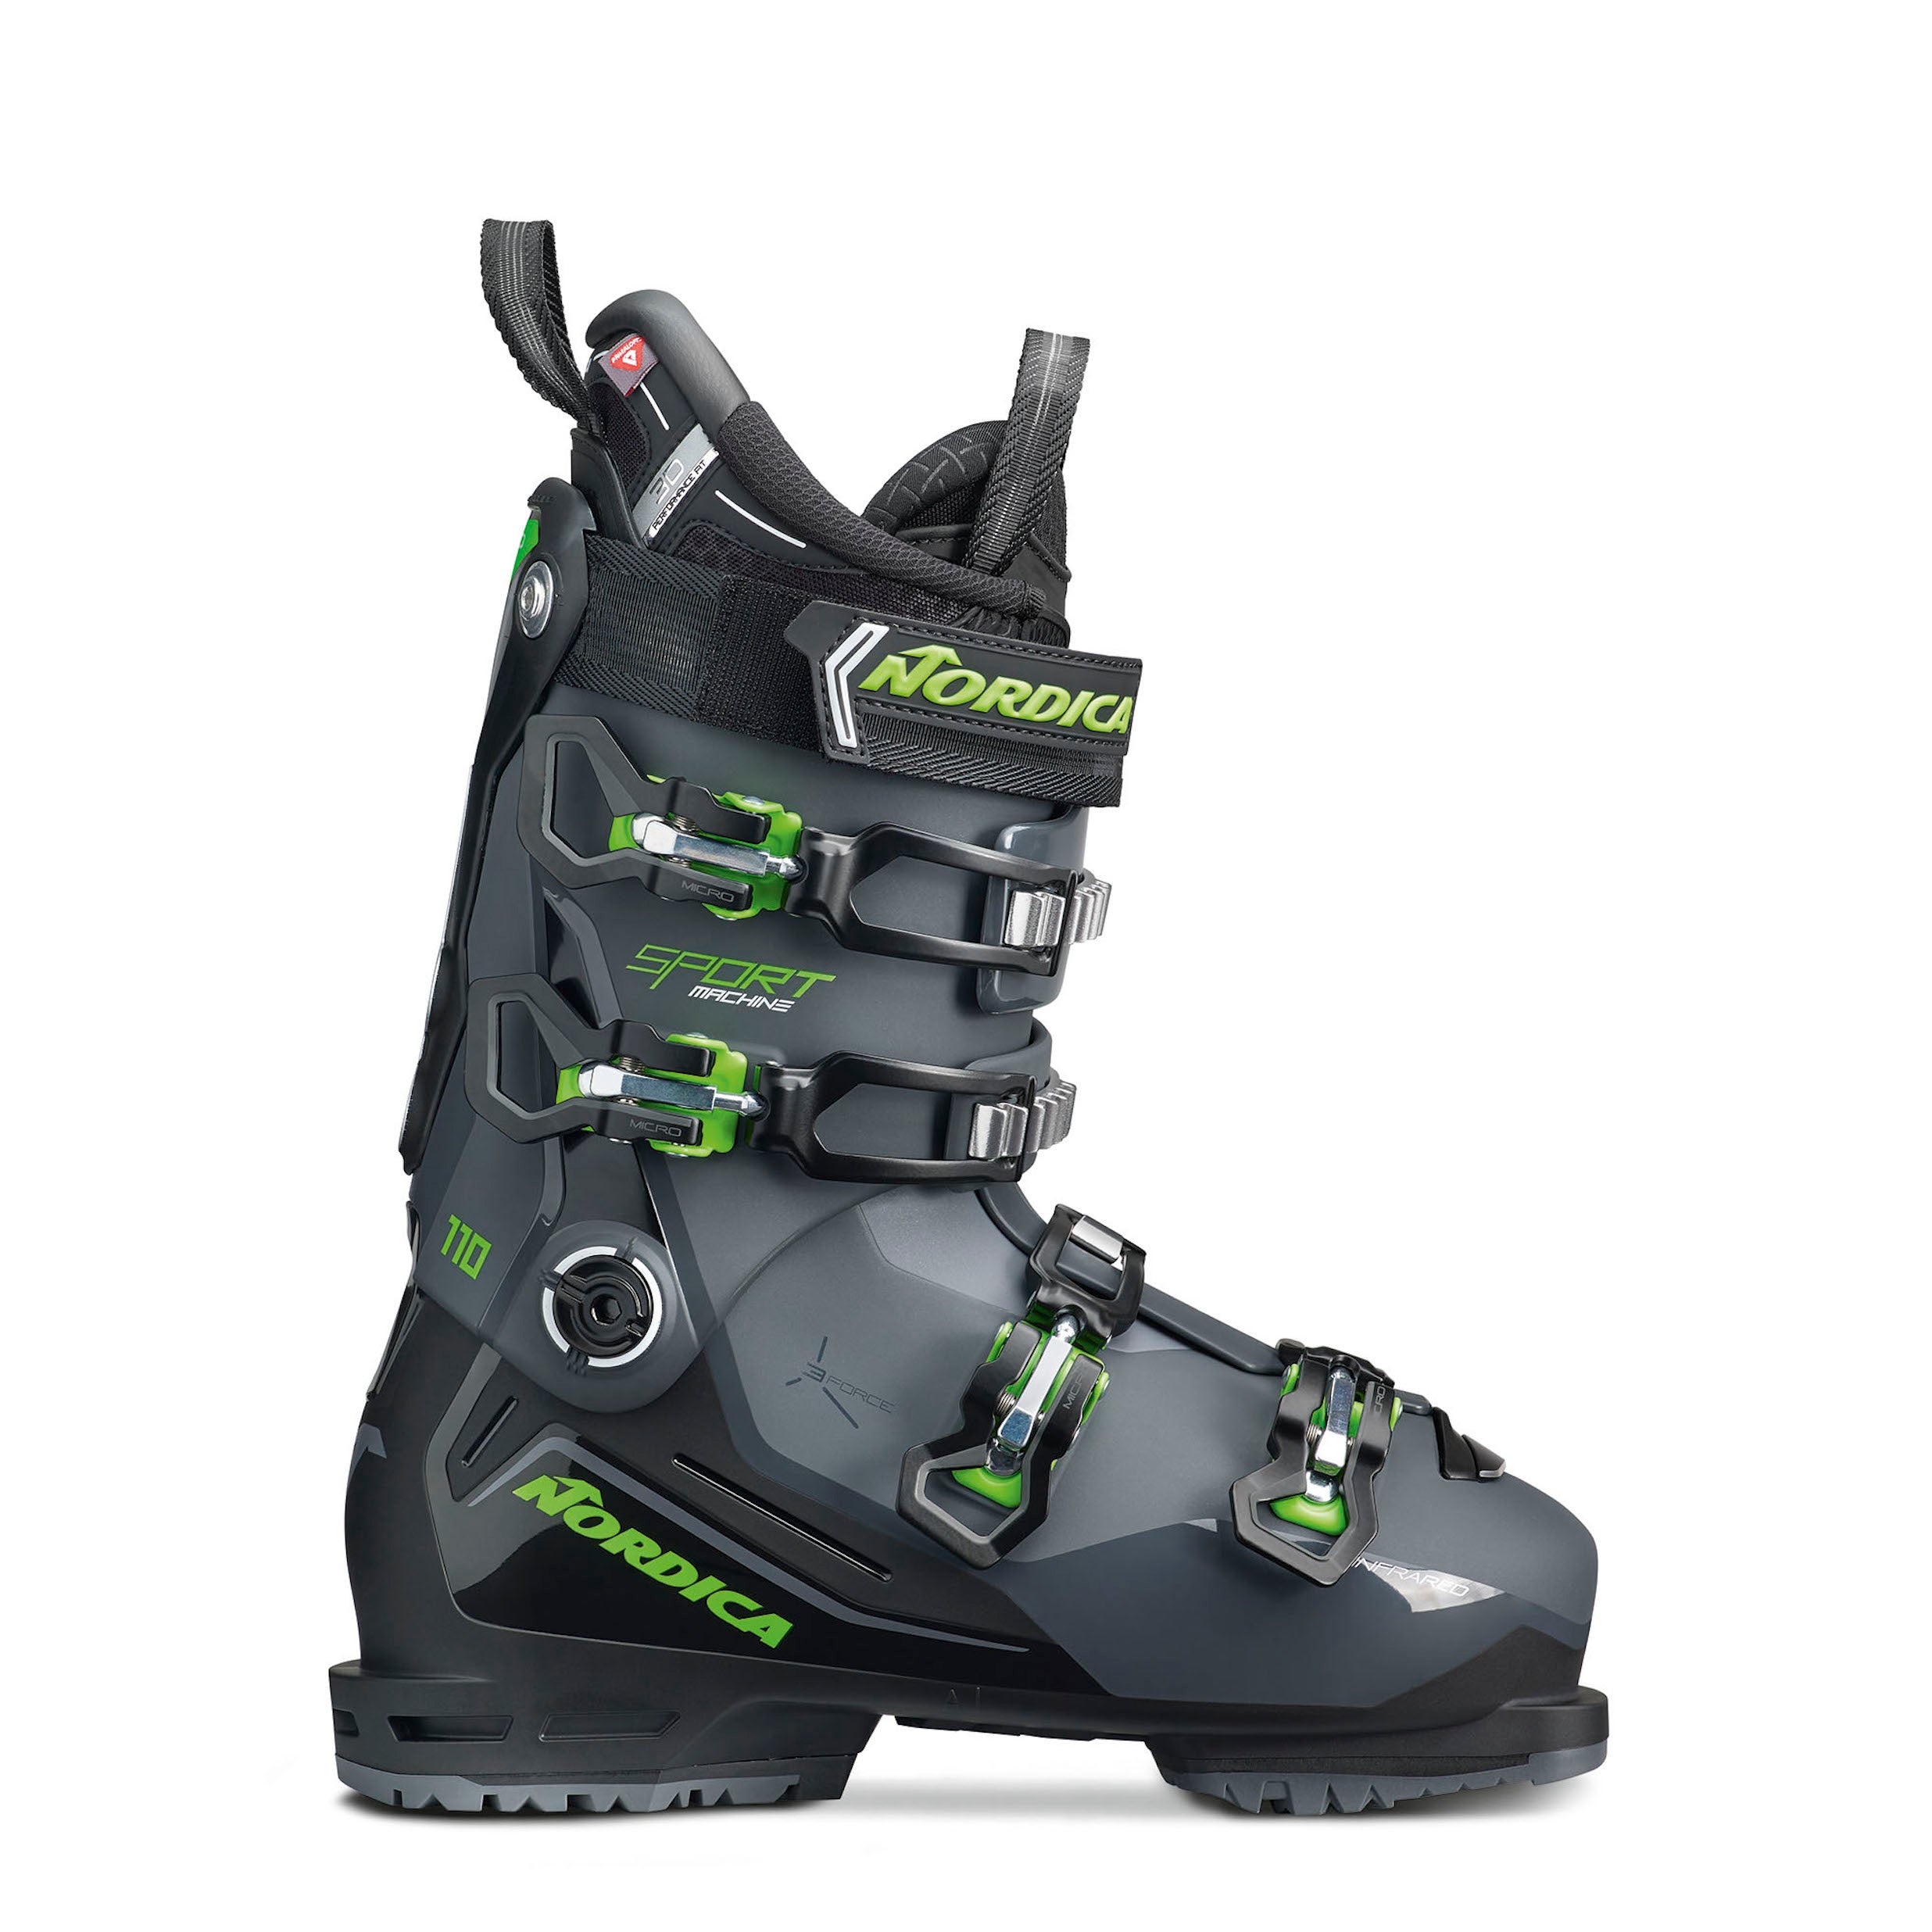 Men's Nordica Sportmachine 3 110 black and grey ski boot with bright green accents on buckles.